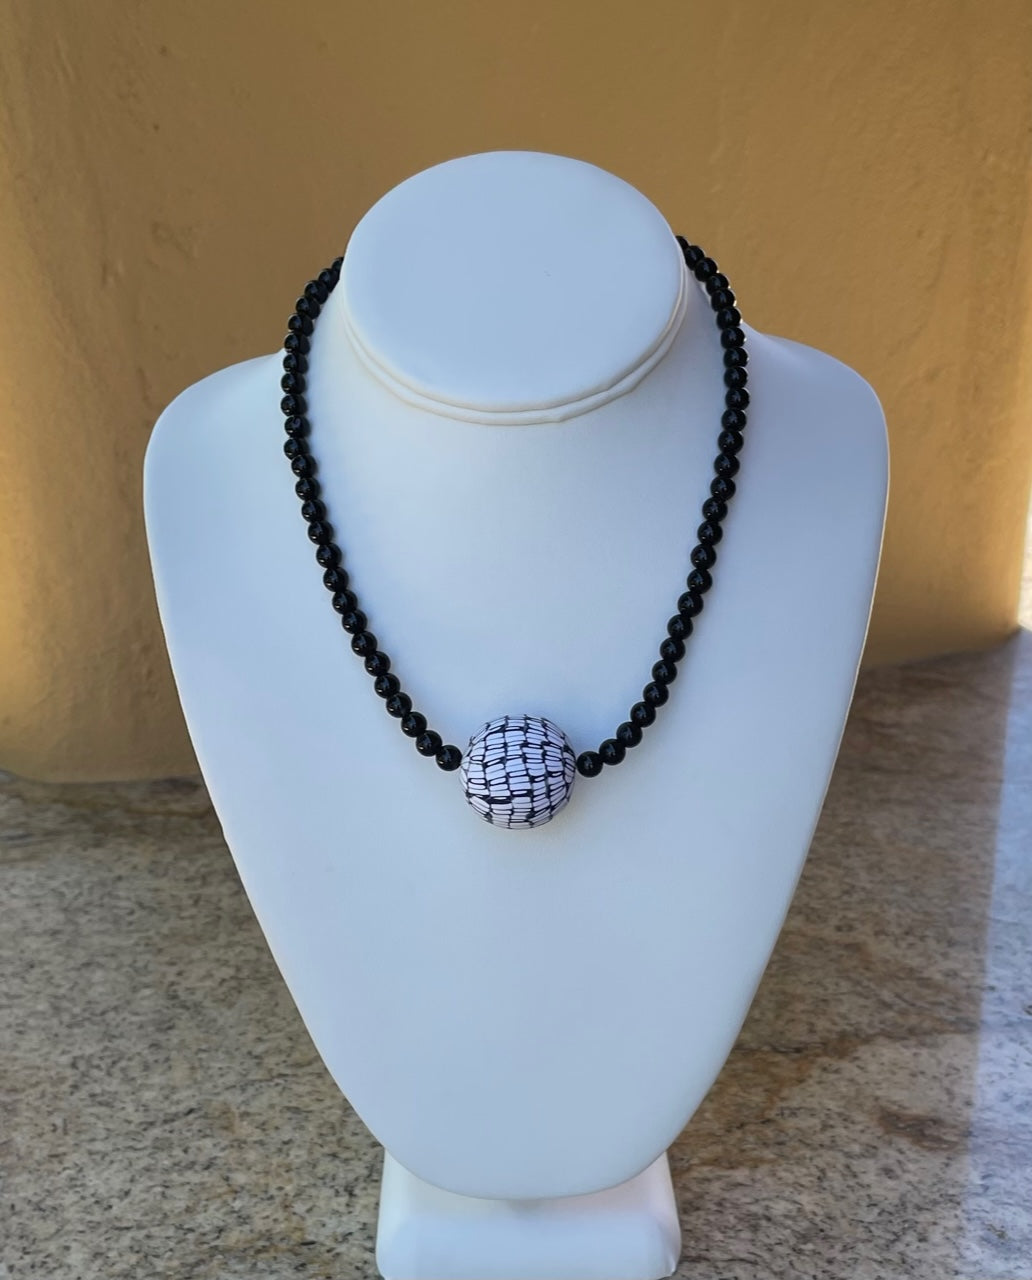 Necklace - Black onyx and a large black and white handmade clay bead